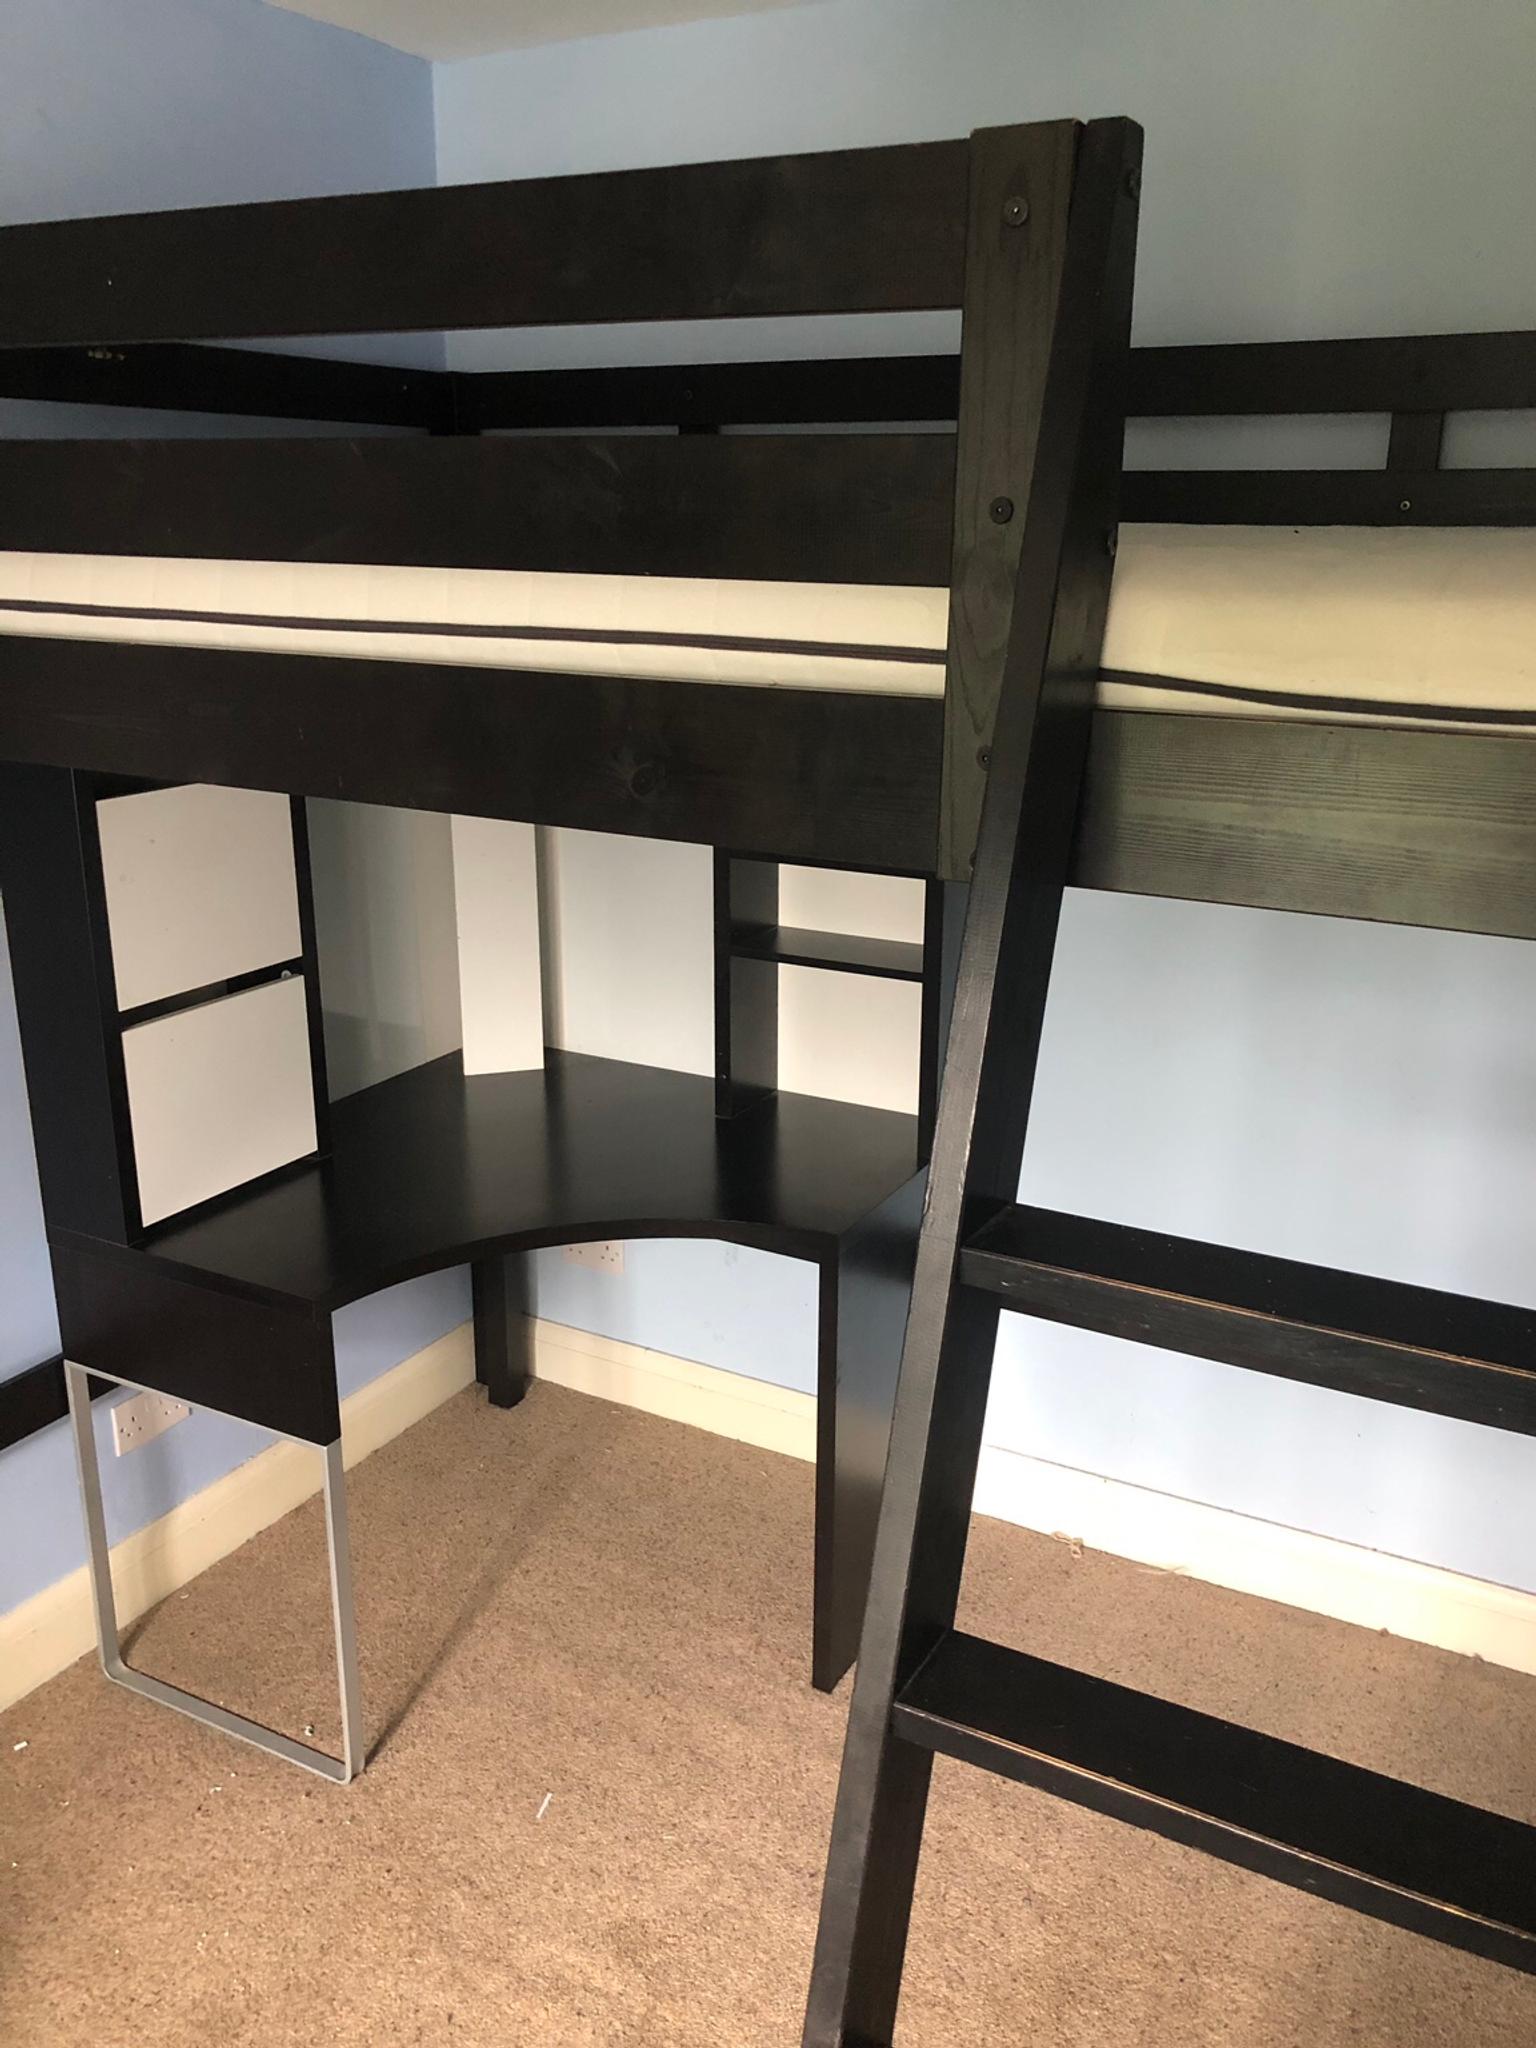 Ikea Loft Bed With Desk In Hp1 Dacorum For 100 00 For Sale Shpock